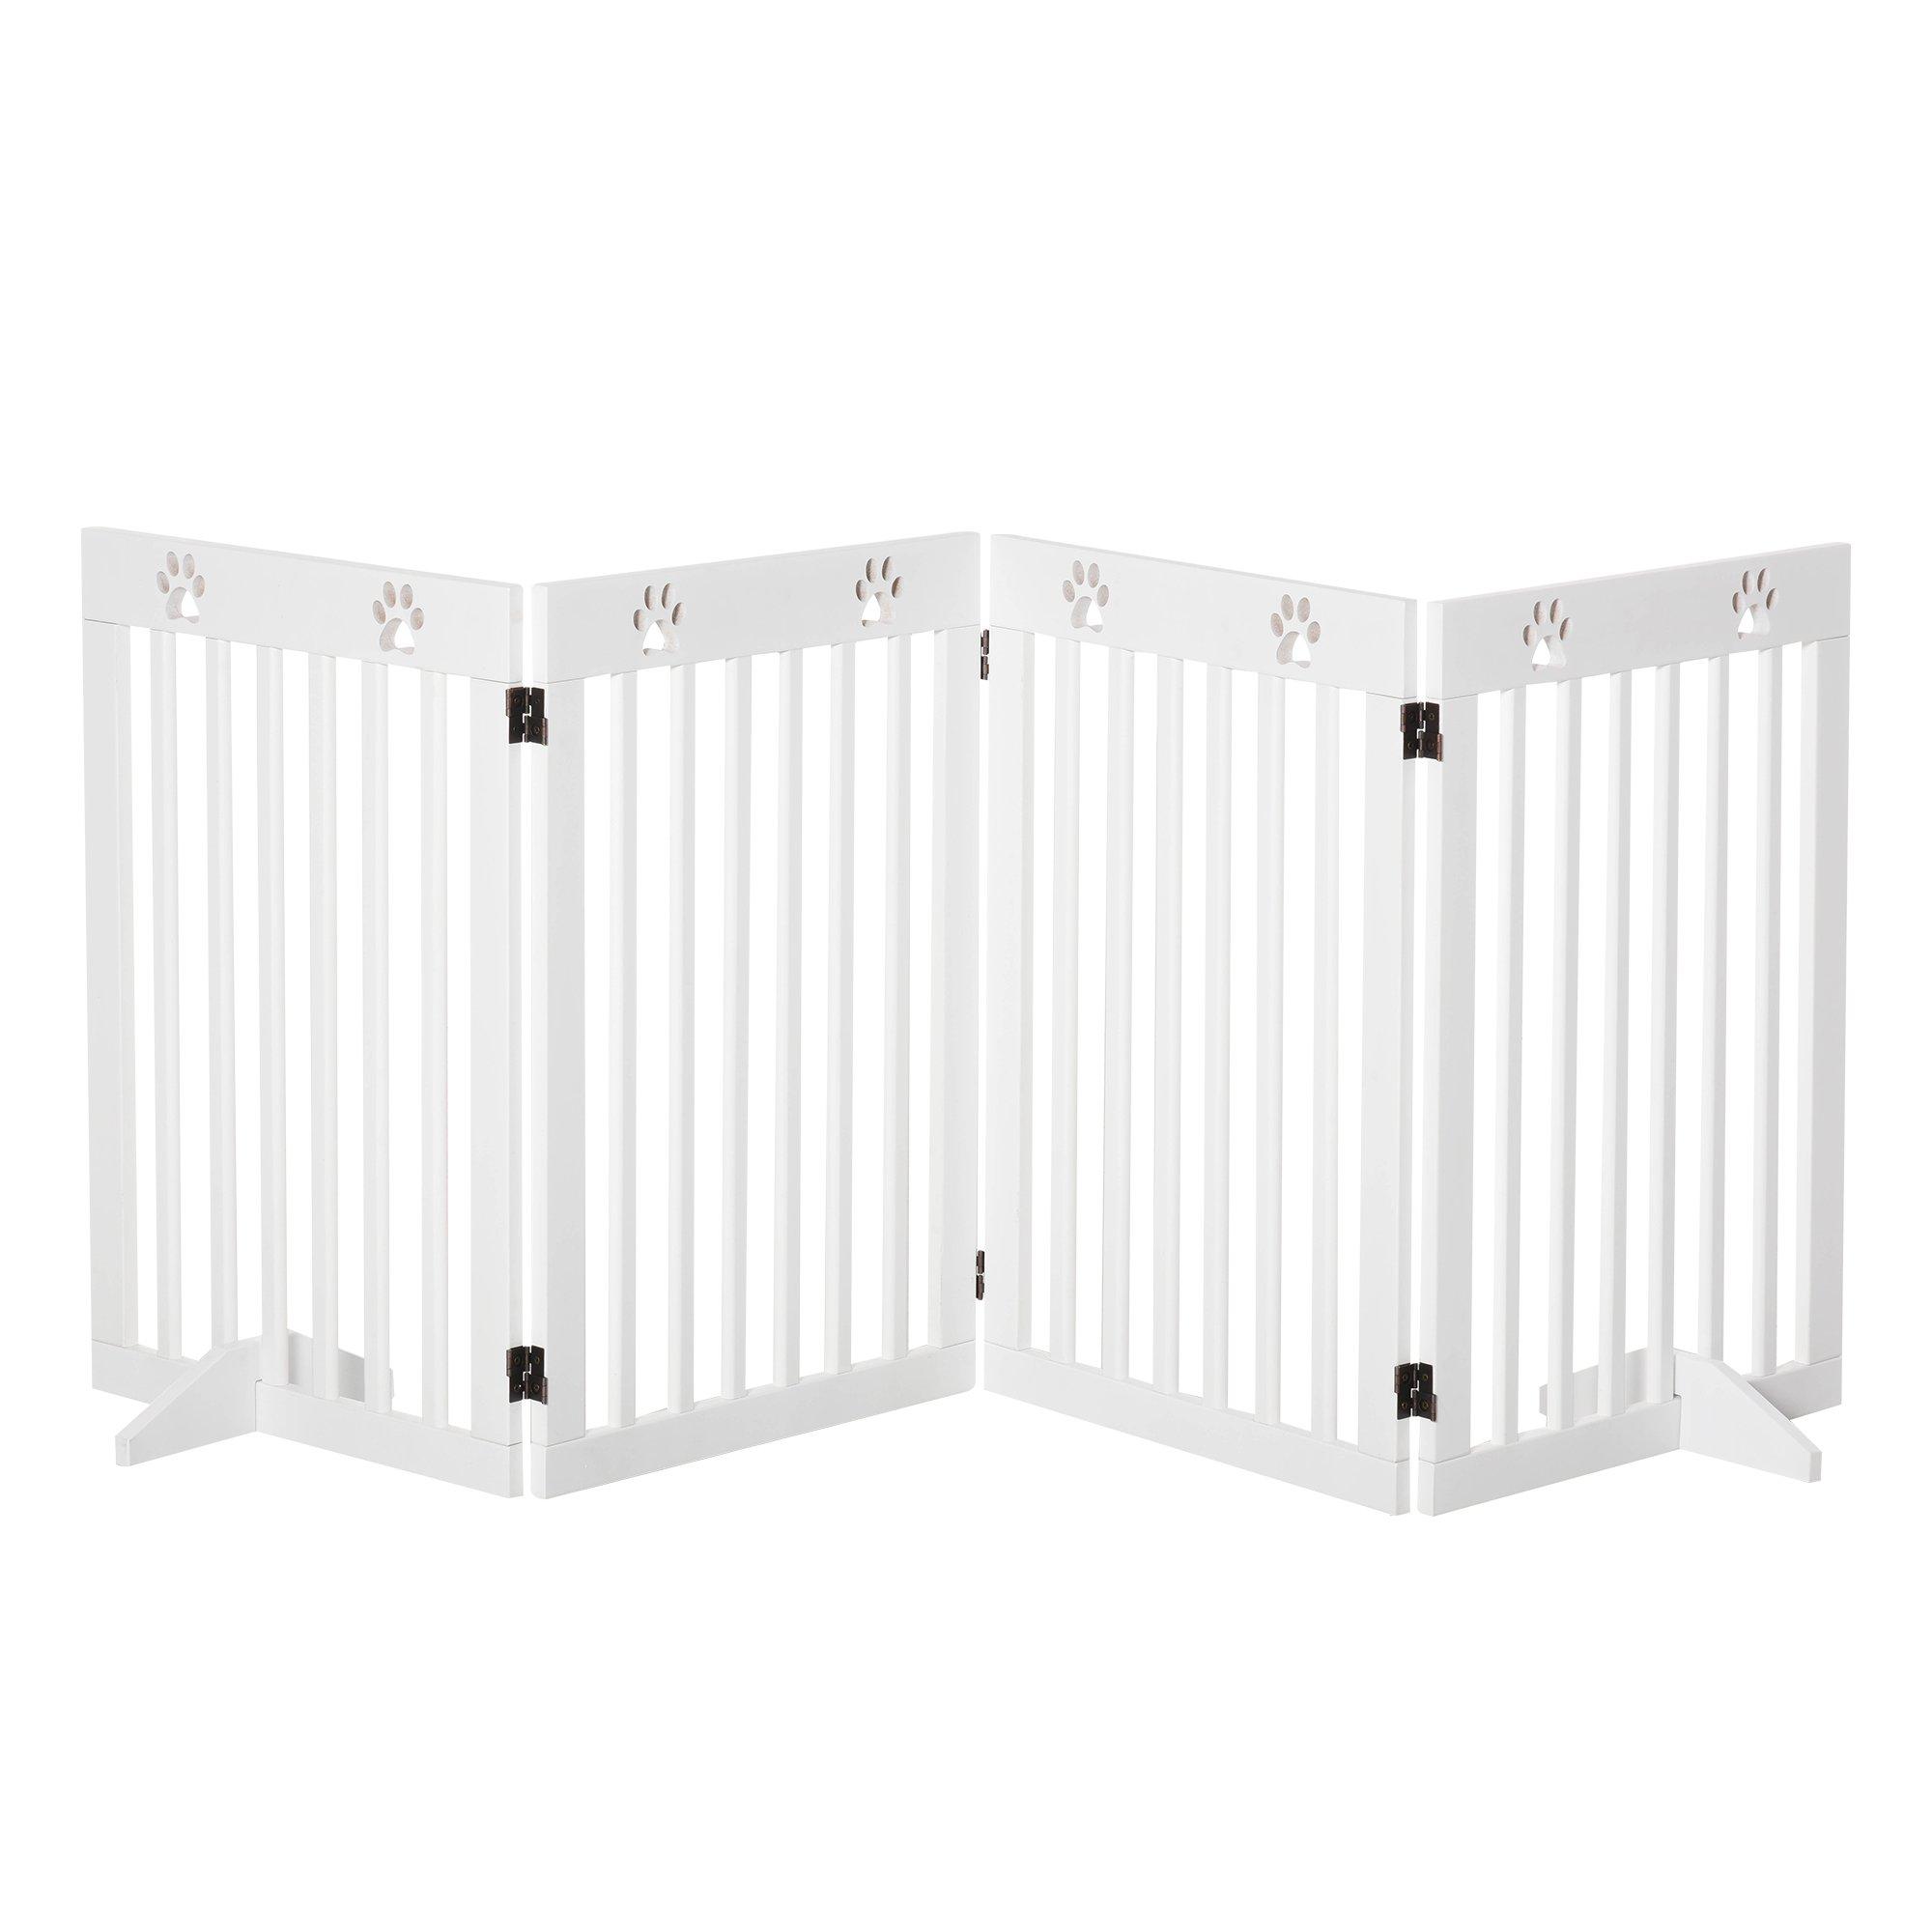 PawHut Pet Gate Foldable Freestanding Dog Safety Barrier with Support Feet